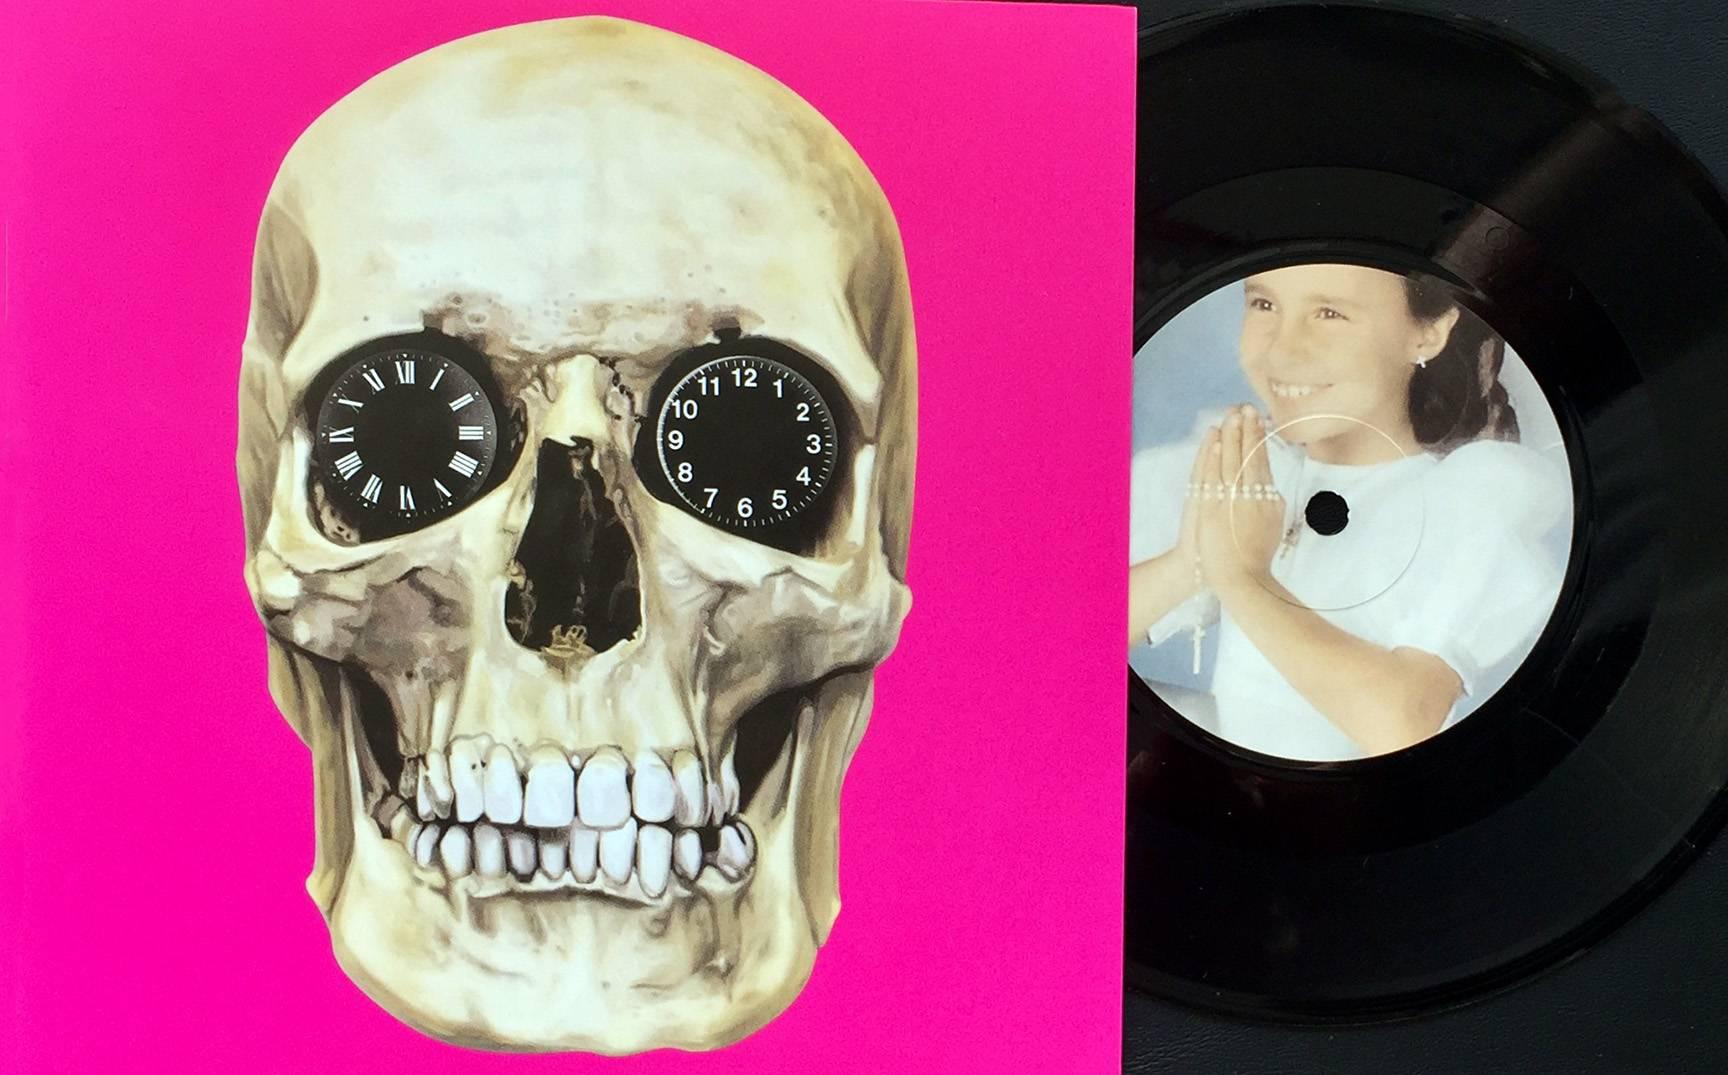 Damien Hirst produced these off-set album cover art exclusively for the heralded UK music group The Hours c.2006

Off-set print on vinyl record jacket
12 x 12 inches (30.48 x 30.48 cm)
Excellent condition for both the cover(s) and record
Looks